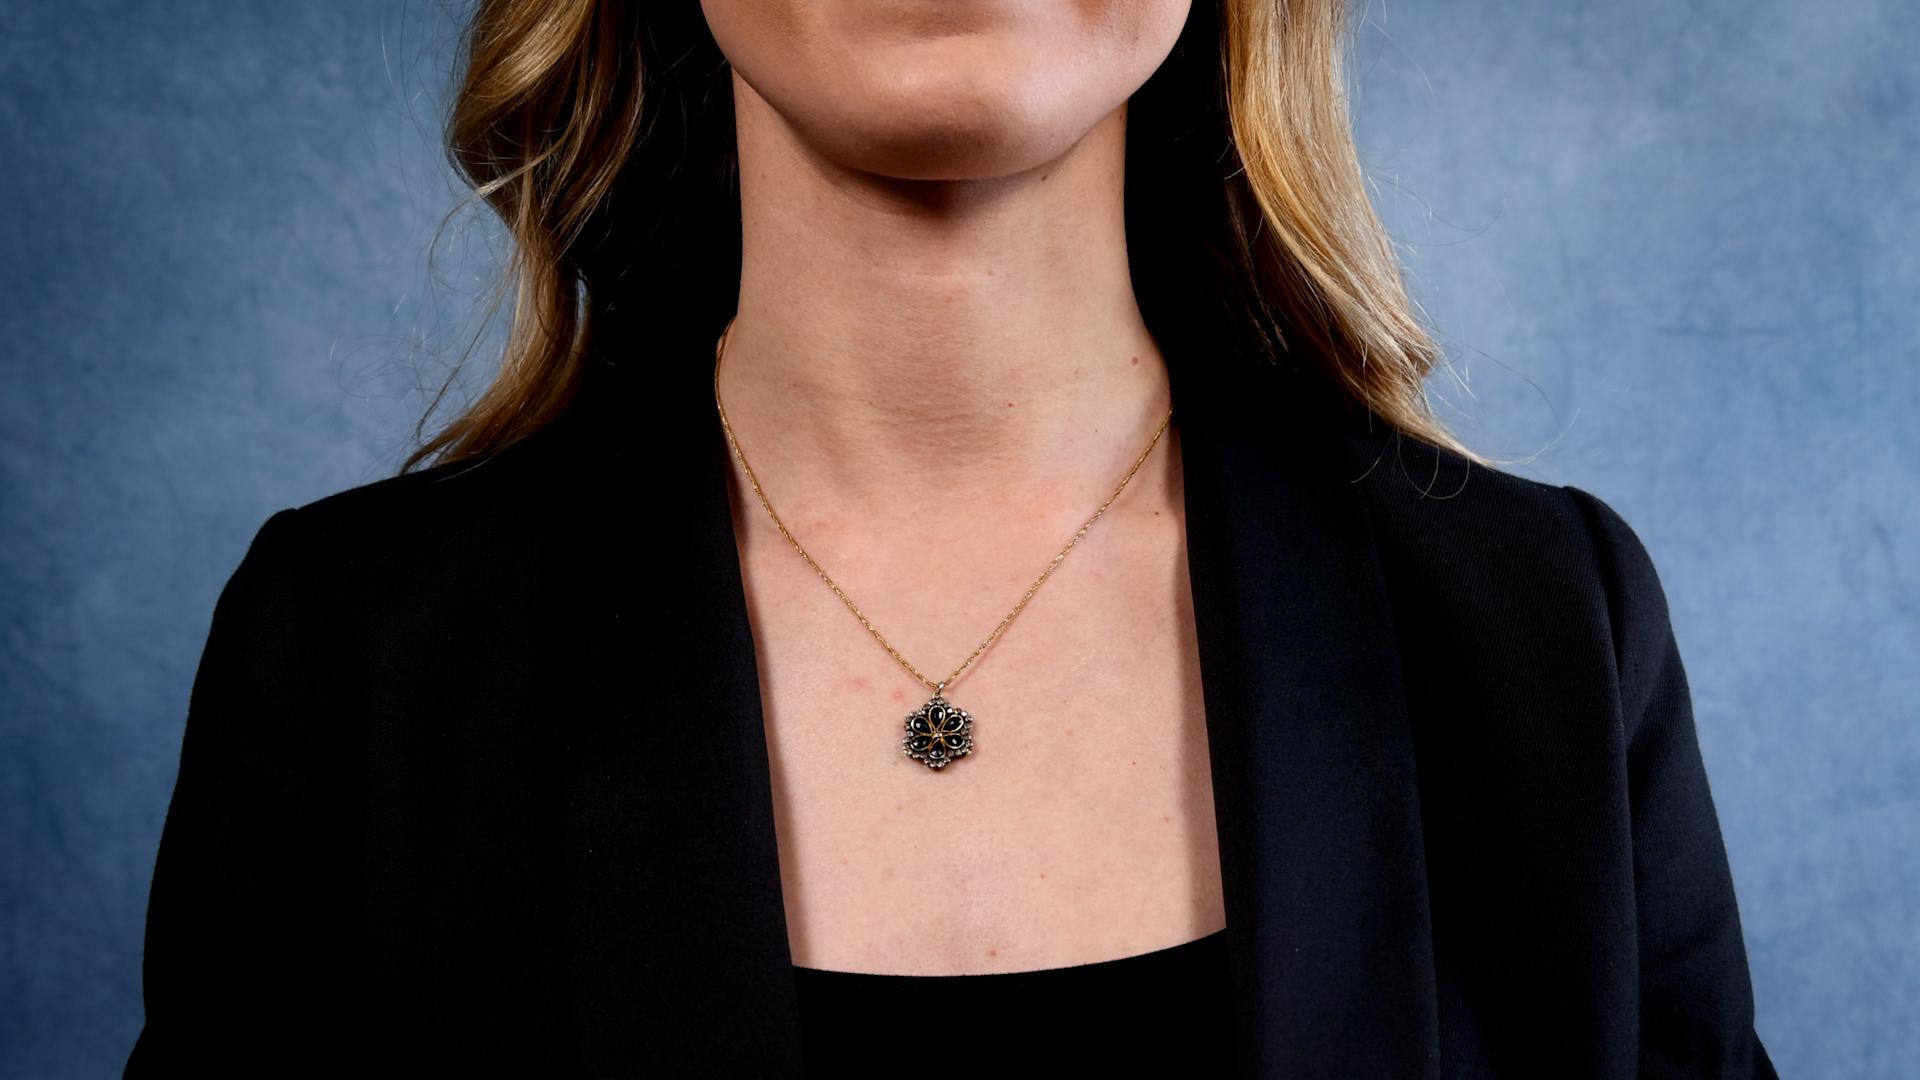 One Mid-Century Onyx and Diamond 14k Yellow Gold Silver Pendant Necklace. Featuring six pear cut onyx. Accented by 30 single cut diamonds with a total weight of approximately 0.30 carat, graded near-colorless to faint, SI-I1 clarity. Crafted in a 14